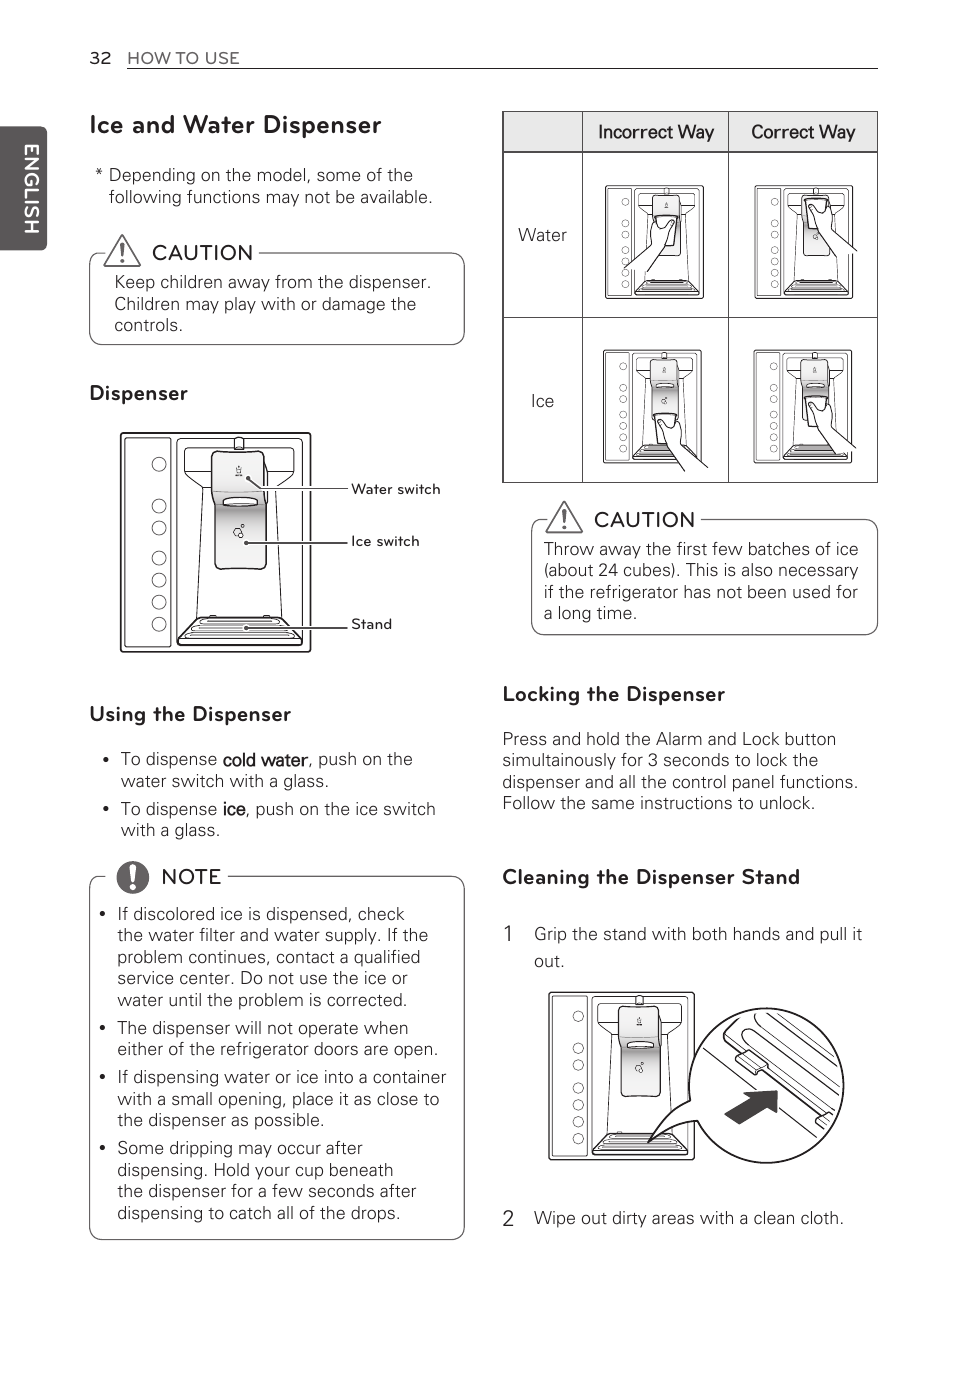 Ice and water dispenser, Caution, Dispenser | LG French Door